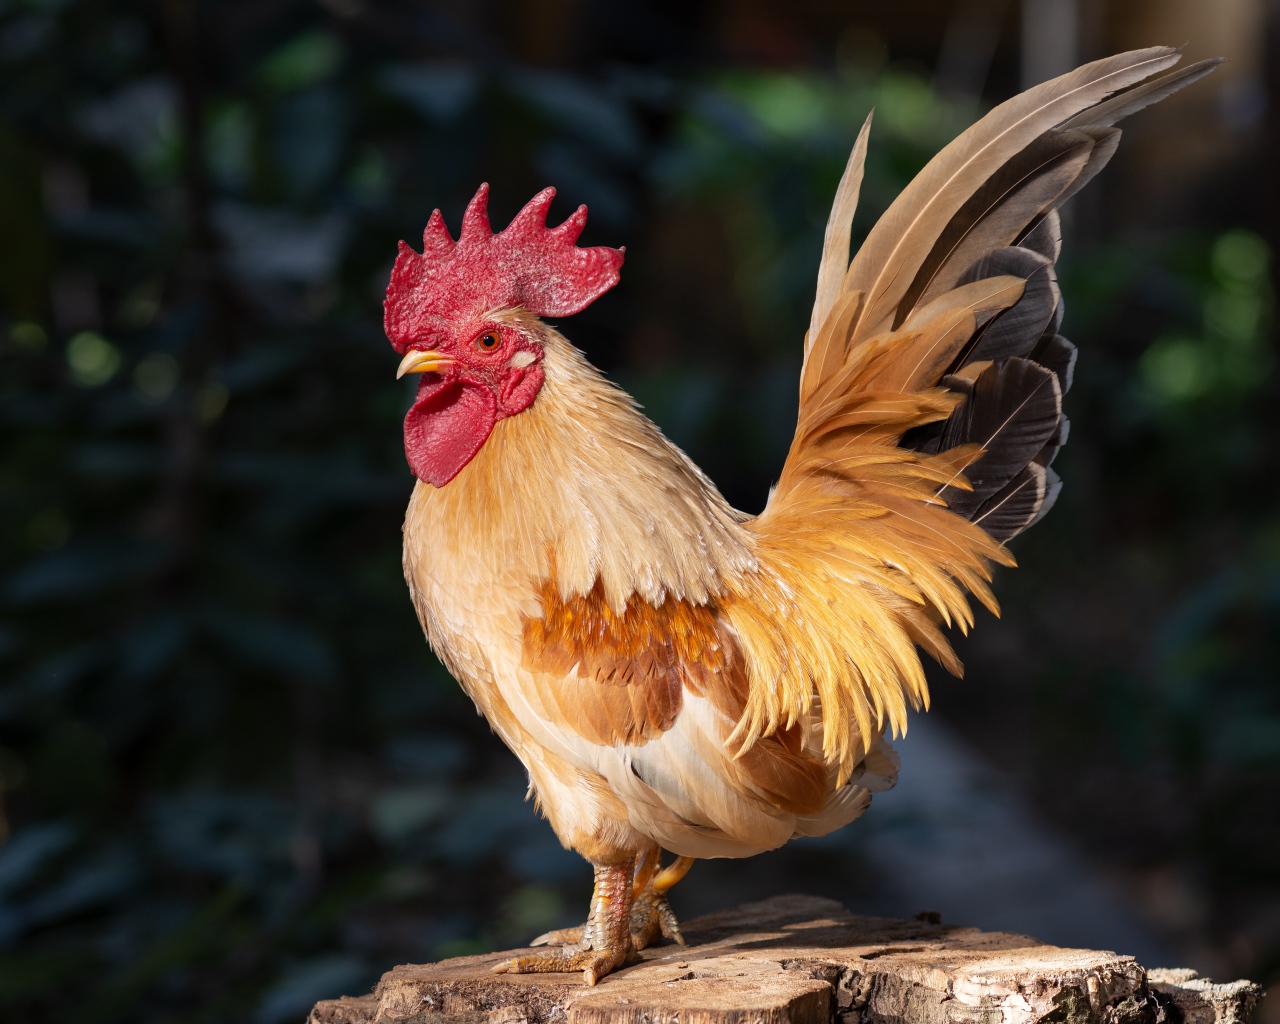 A beautiful domestic rooster stands on a tree stump in the sun